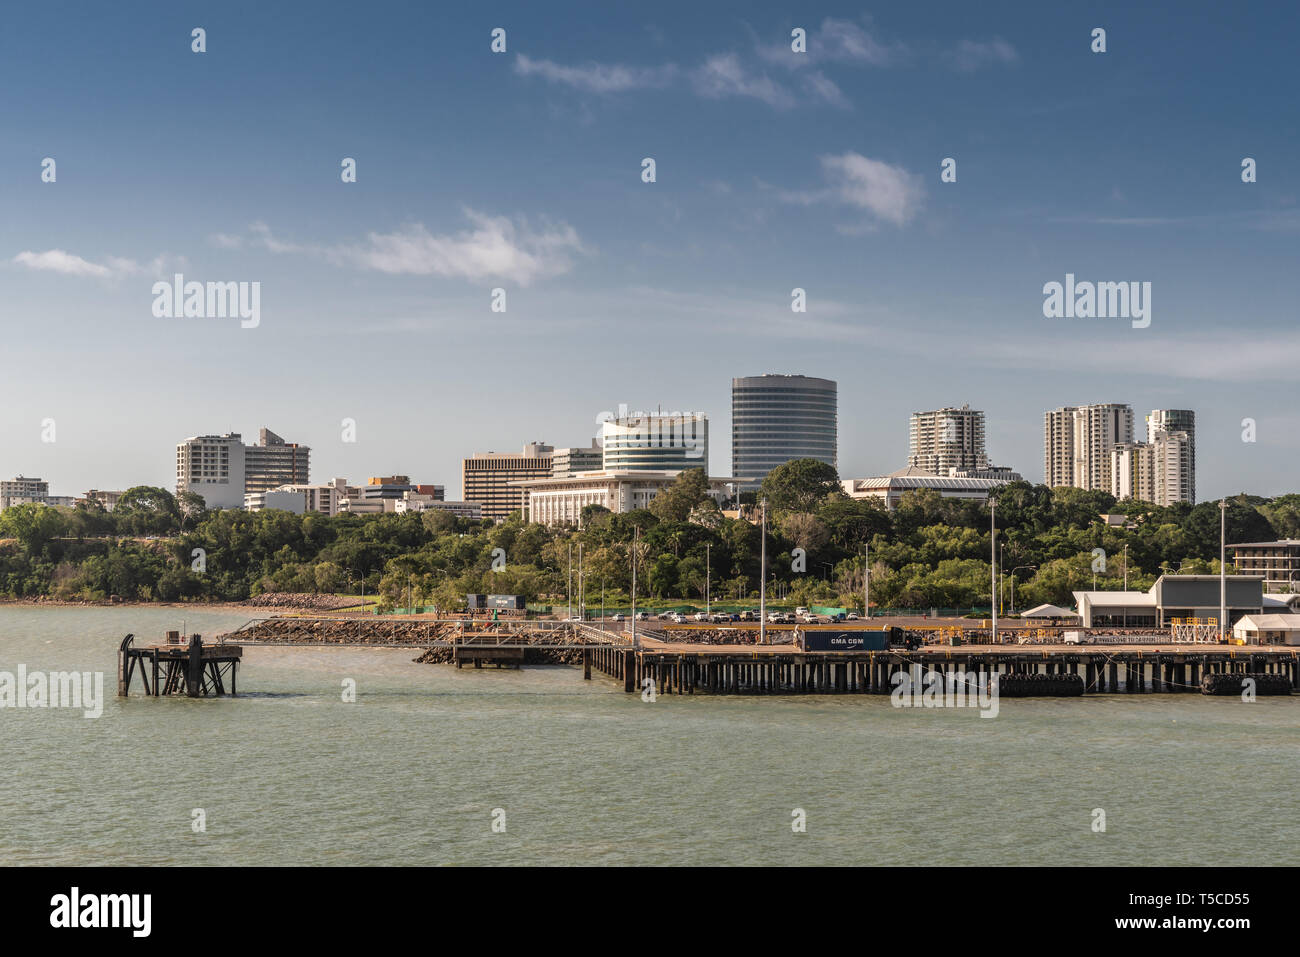 Darwin Australia - February 22, 2019: South side downtown skyline seen from harbour waters. Dock up front. Blue sky and greenish water. Stock Photo